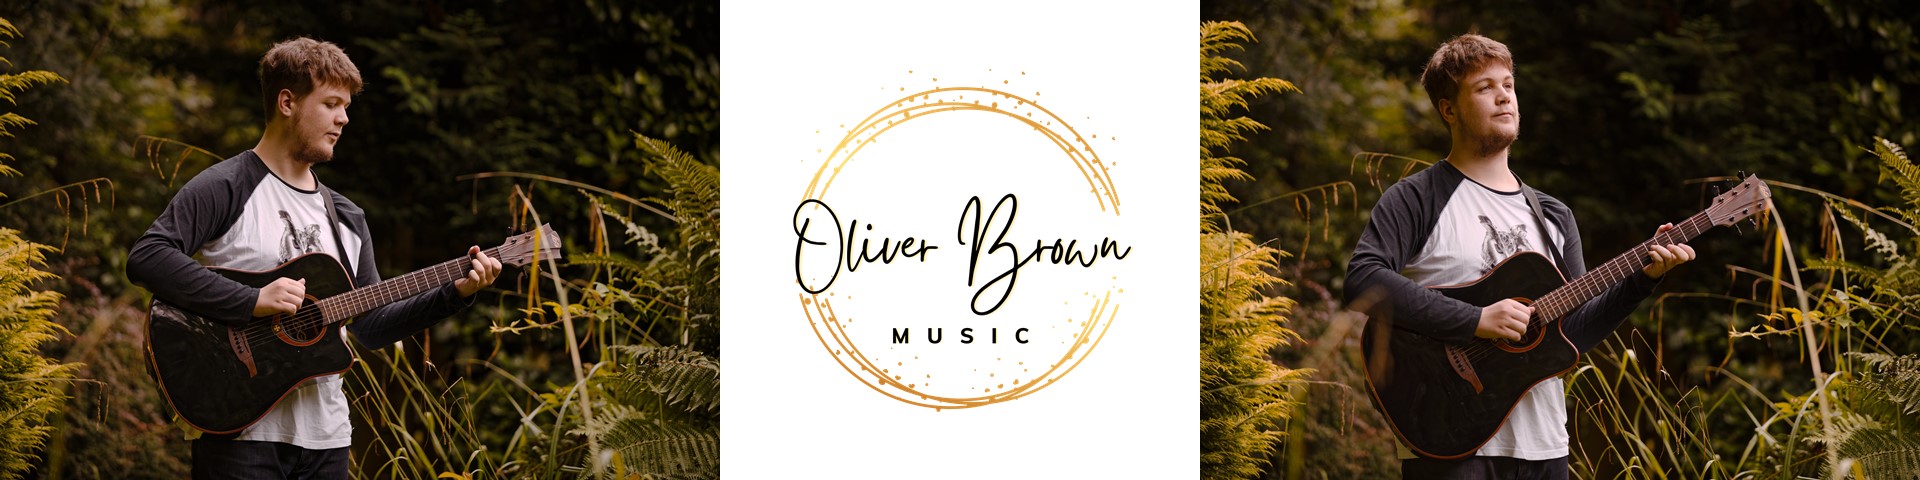 Your song, bespoke wedding music, composer Oliver Brown 